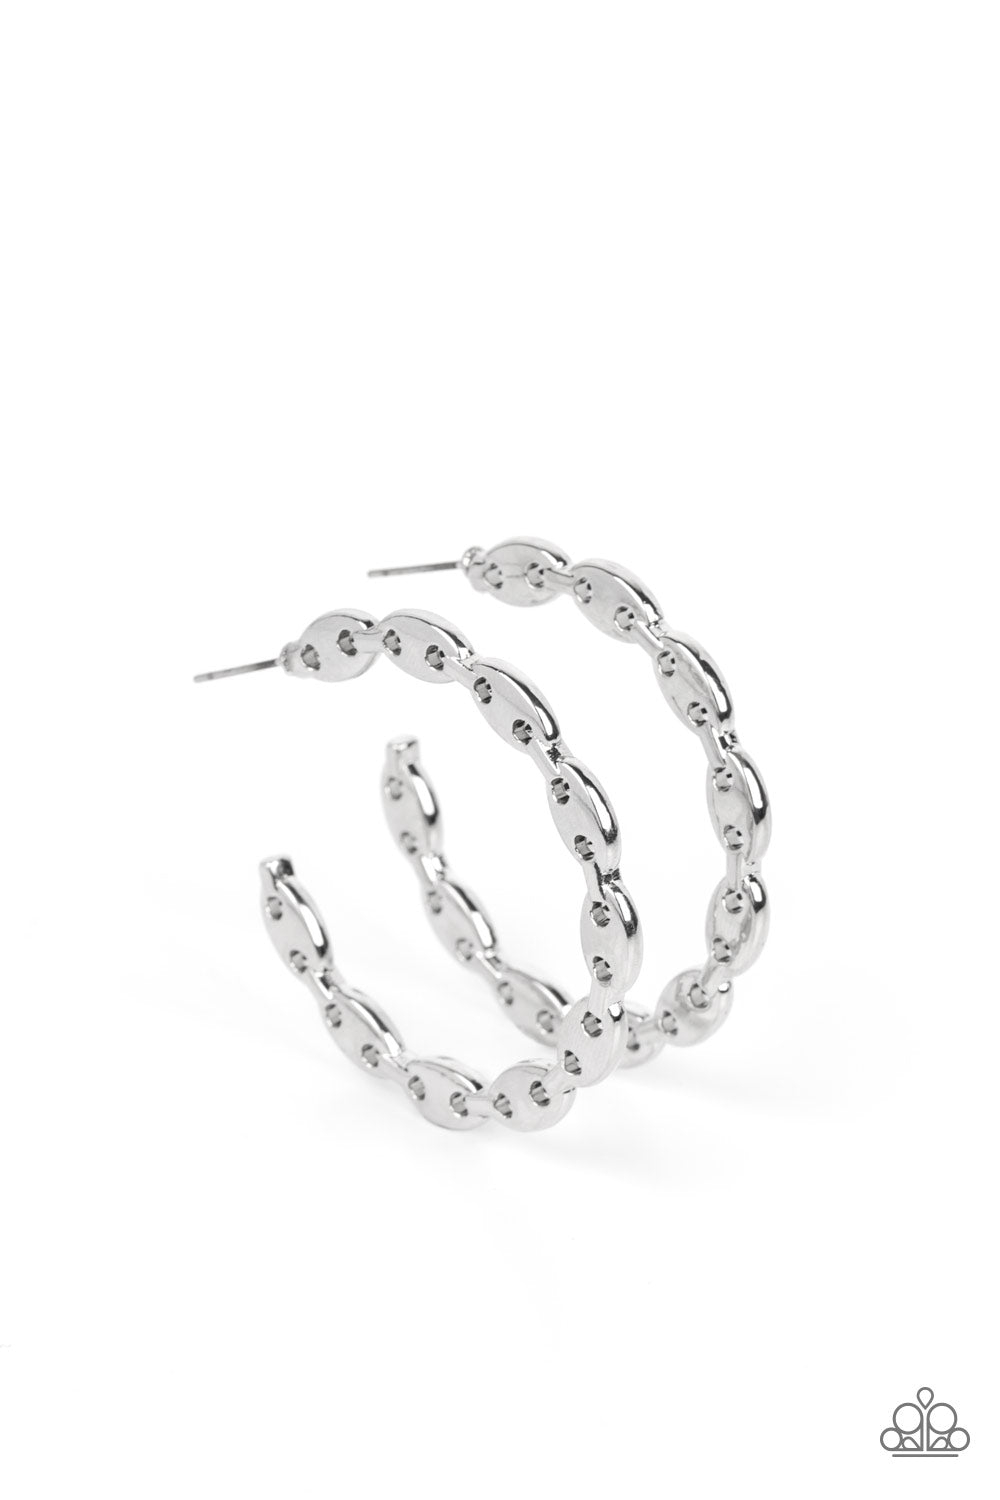 Paparazzi Accessories Impressive Innovation - Silver Featuring pairs of airy circles, flat and oval silver beads connect into an intricate hoop for an intense industrial vibe. Earring attaches to a standard post fitting. Hoop measures approximately 1 1/2"